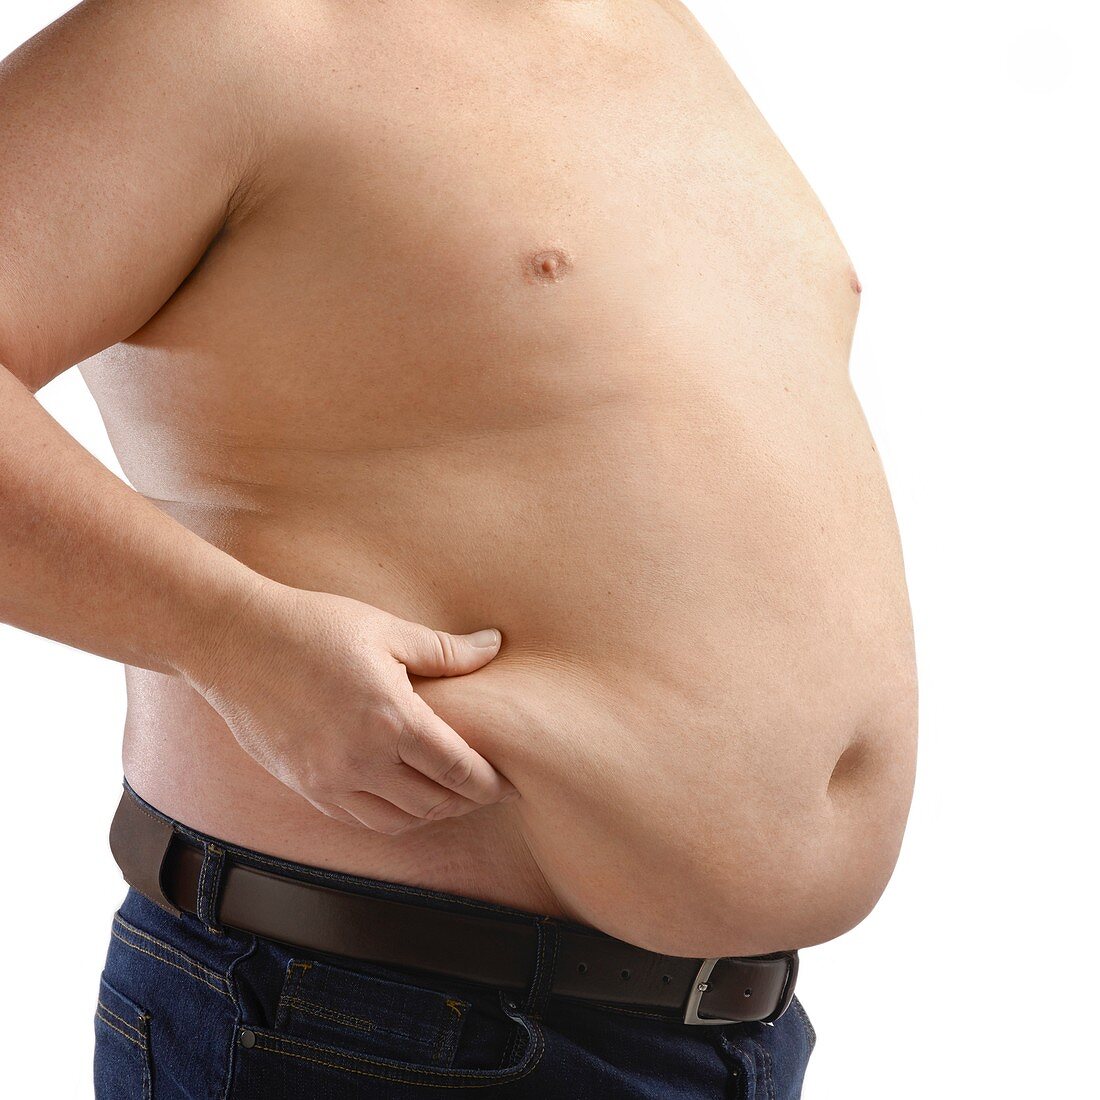 Topless overweight man holding body fat